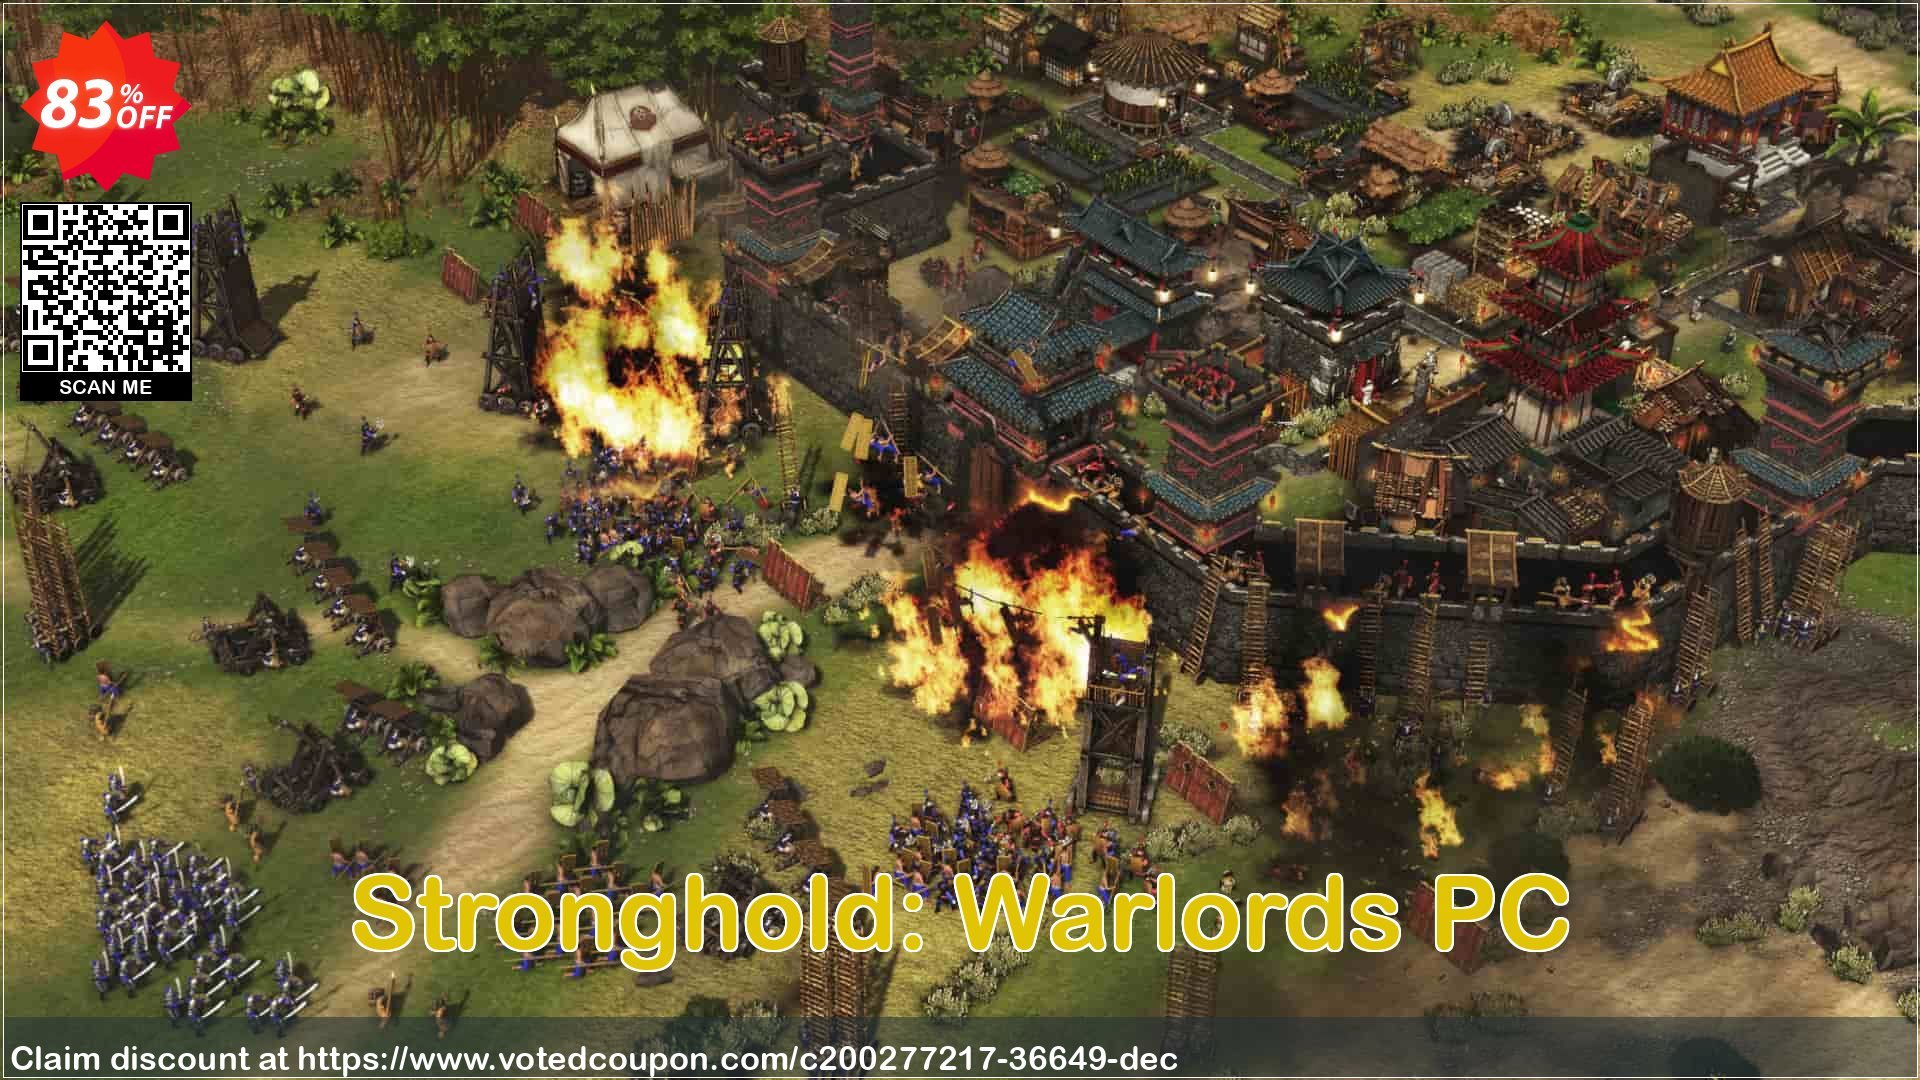 Stronghold: Warlords PC Coupon Code Apr 2024, 83% OFF - VotedCoupon